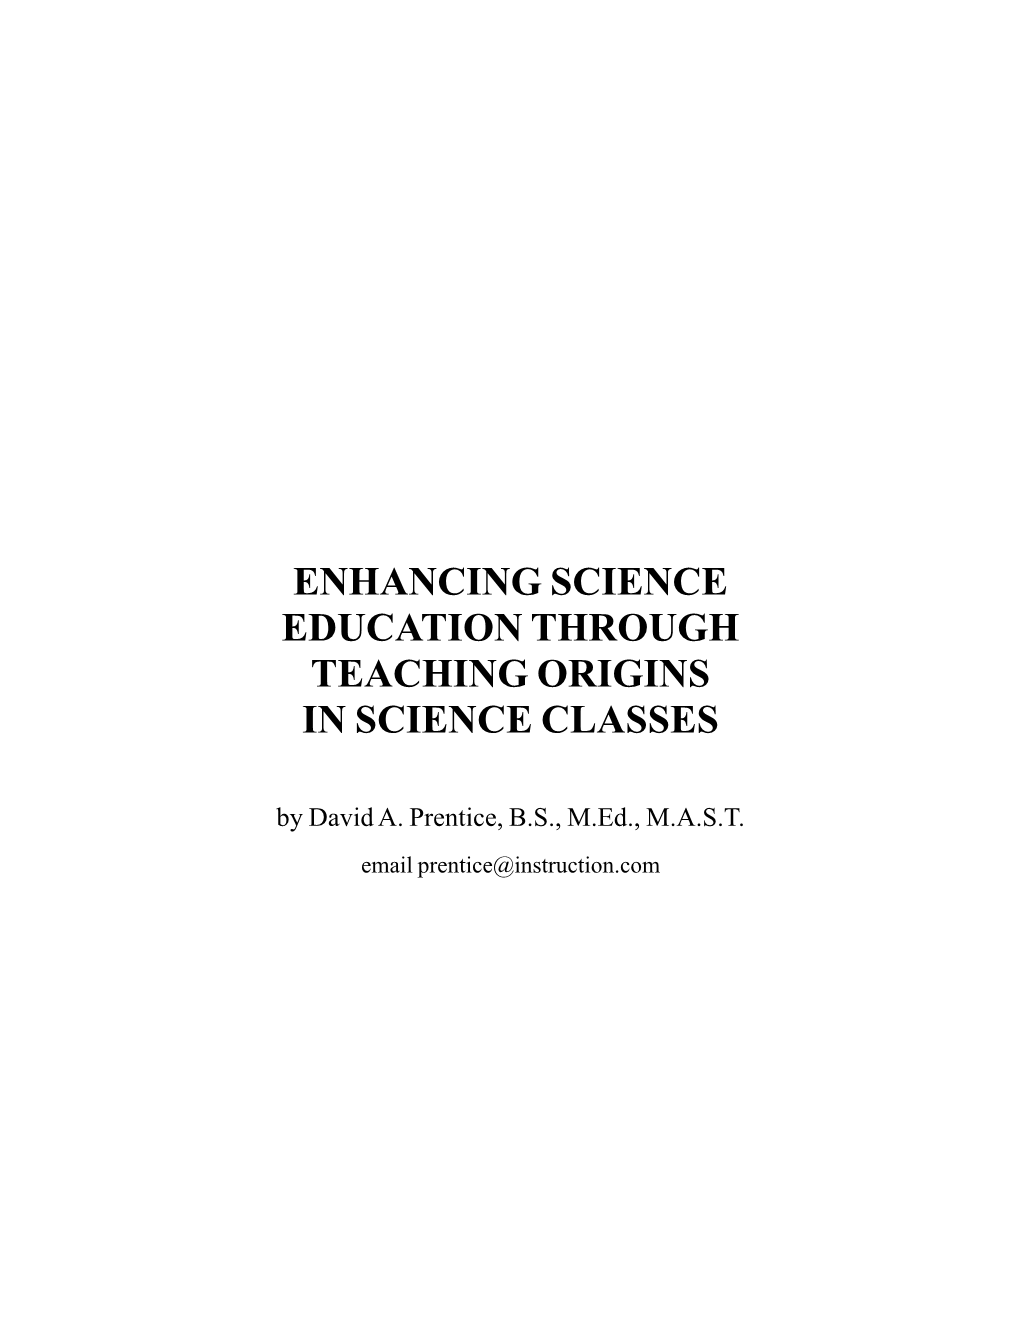 ENHANCING SCIENCE EDUCATION THROUGH TEACHING ORIGINS in SCIENCE CLASSES by David A